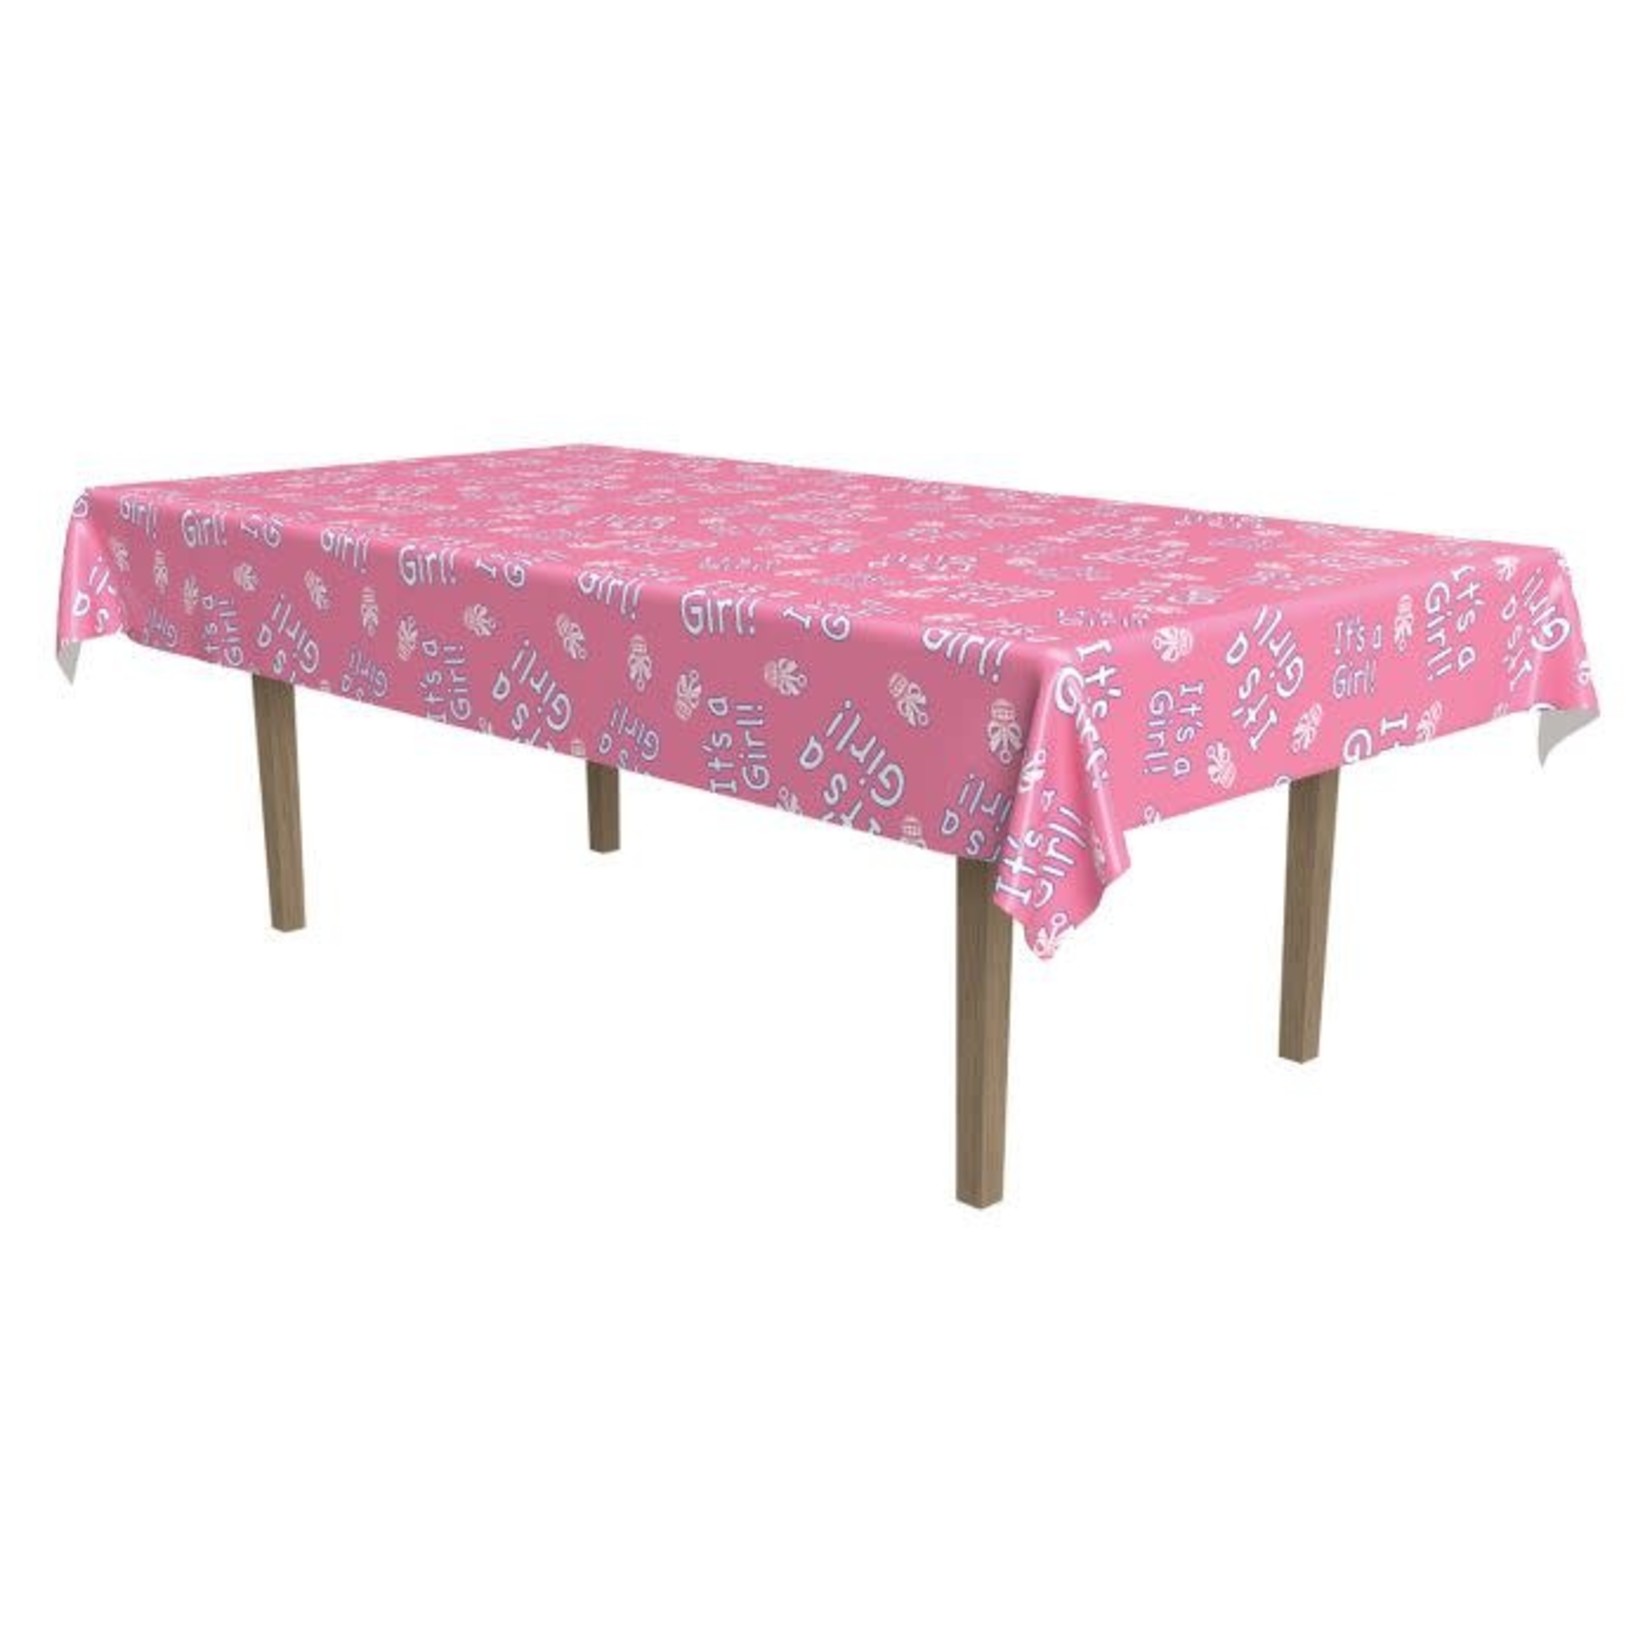 It's A Girl! Tablecover